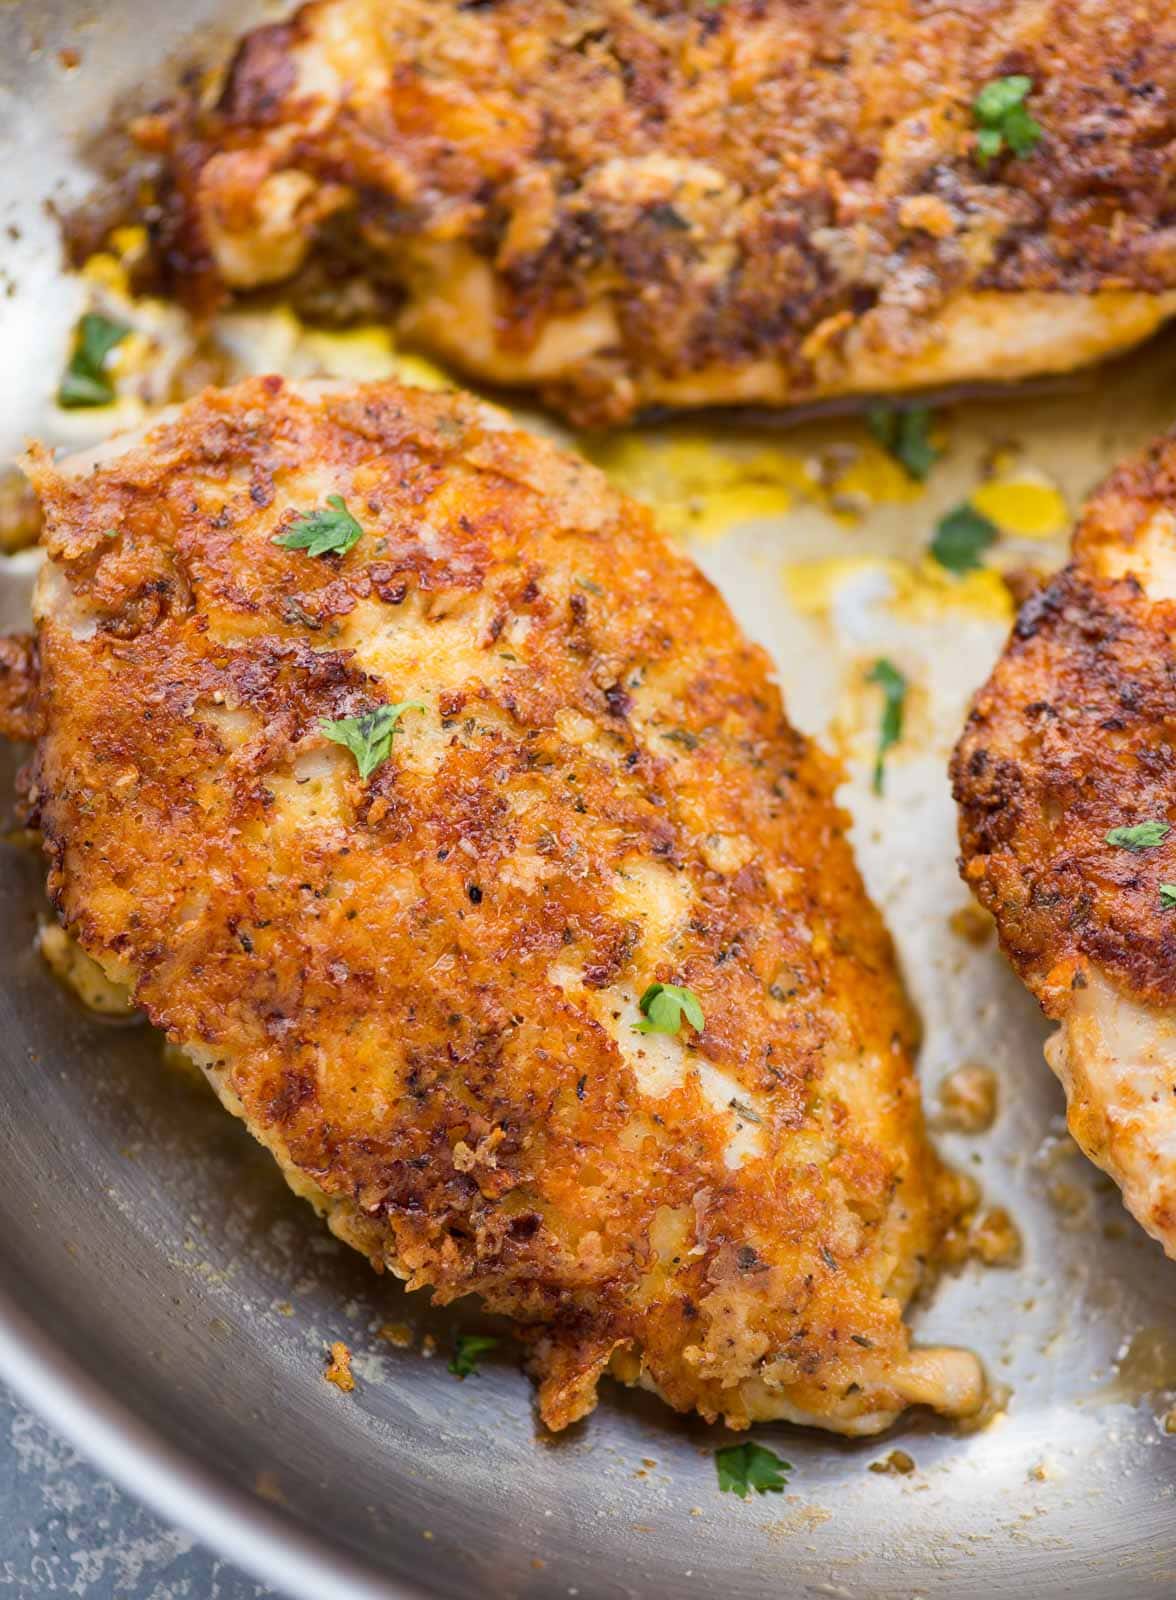 Close up of a parmesan crusted chicken breast piece. Shows a nice crispy and golden brown crust made of parmesan cheese.